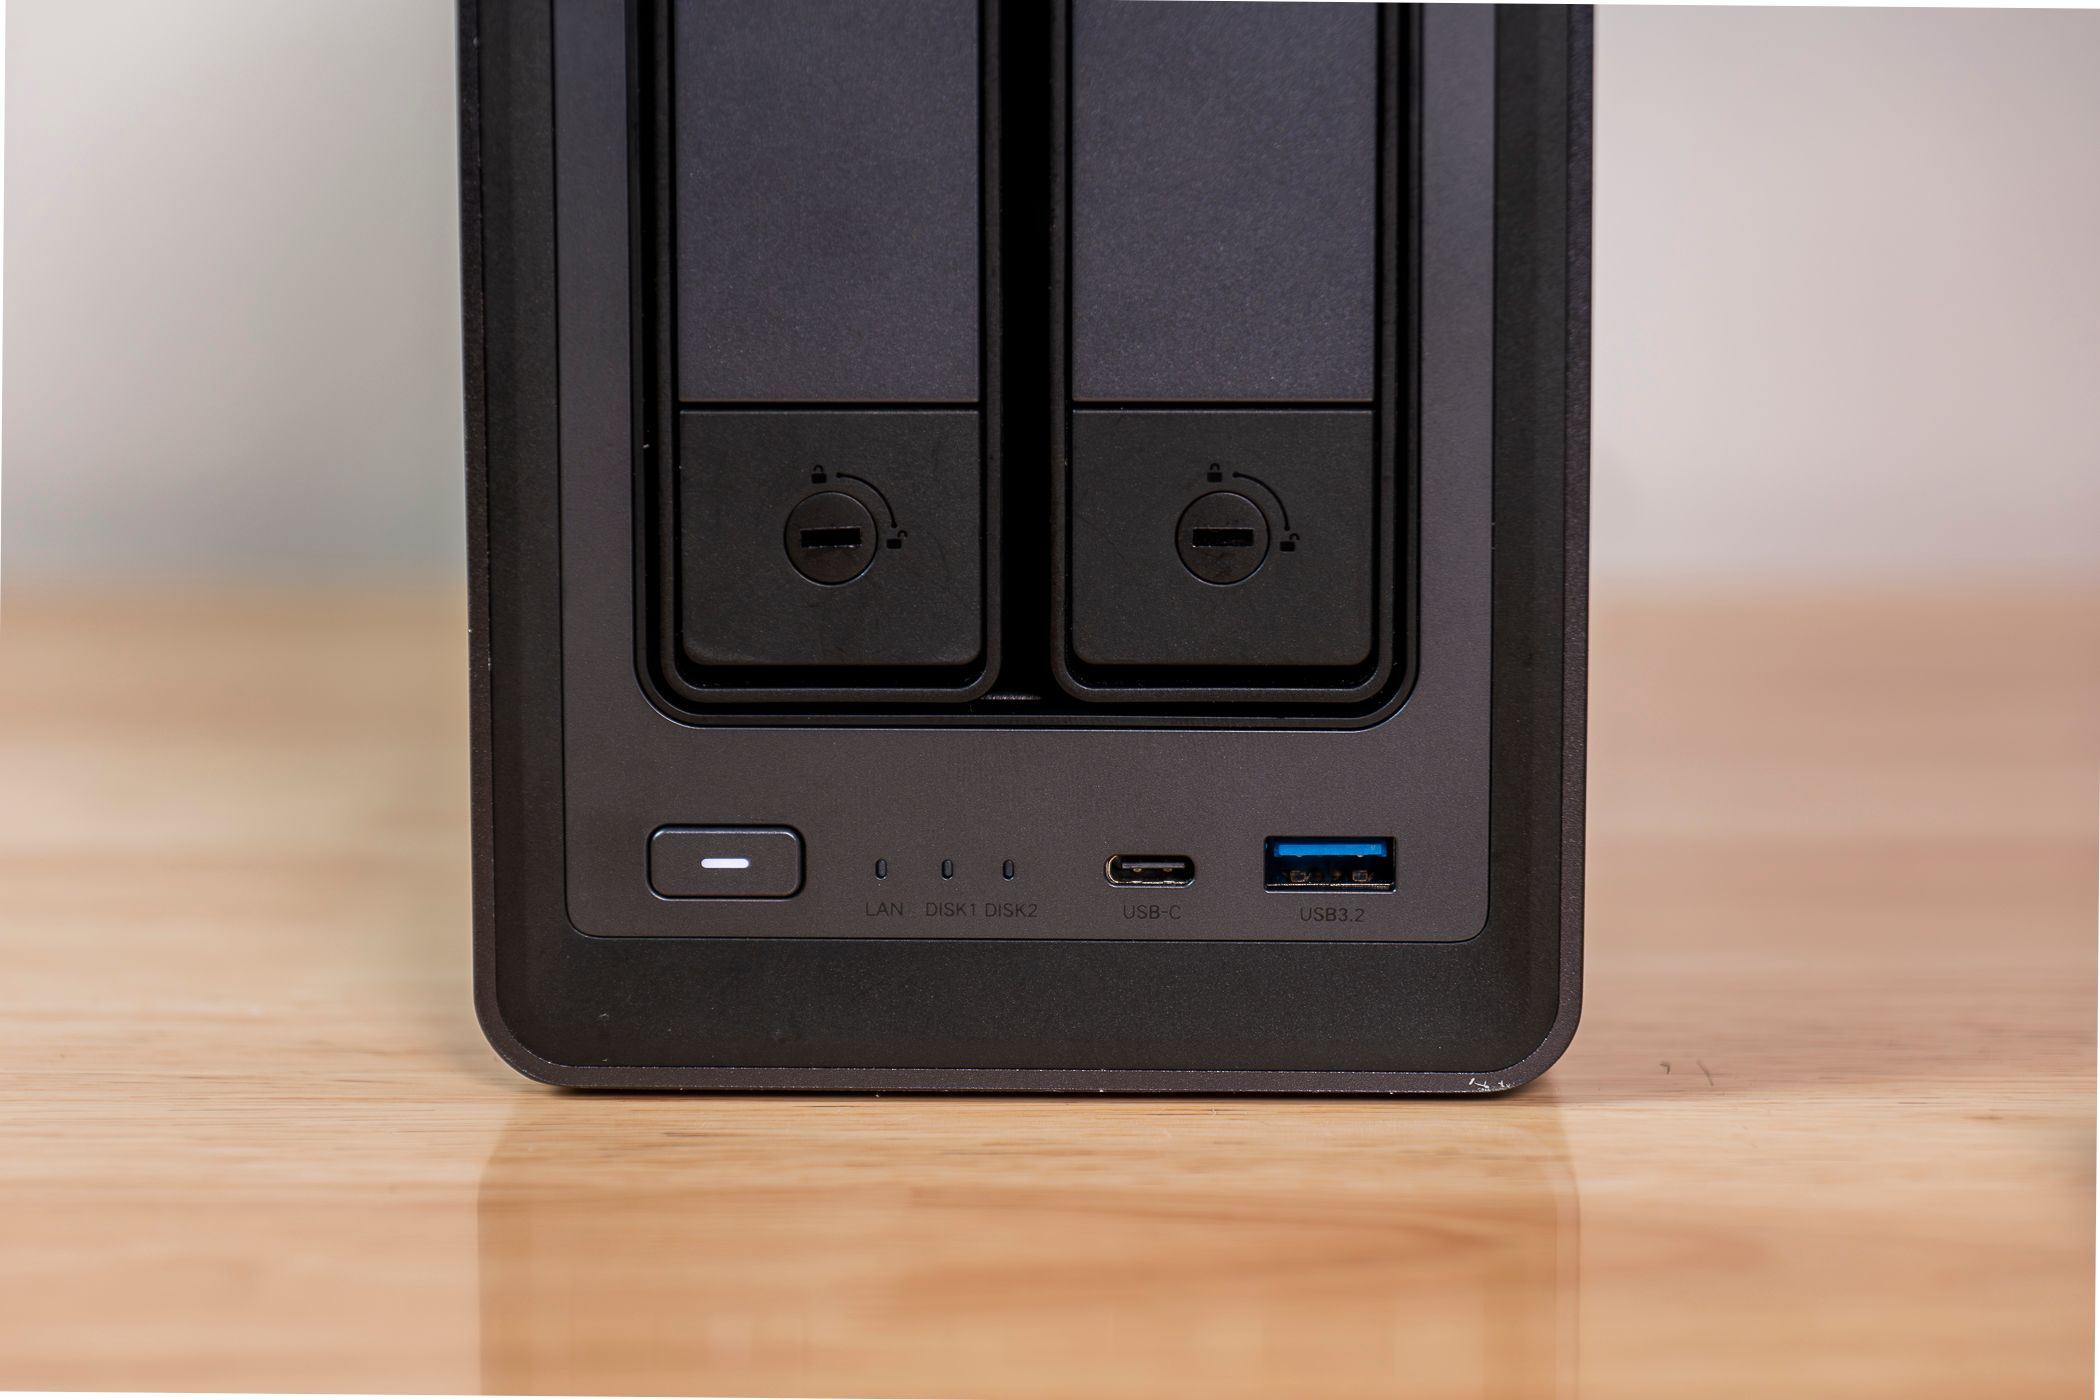 Close up of the front ports on the Ugreen DXP2800 NAS.